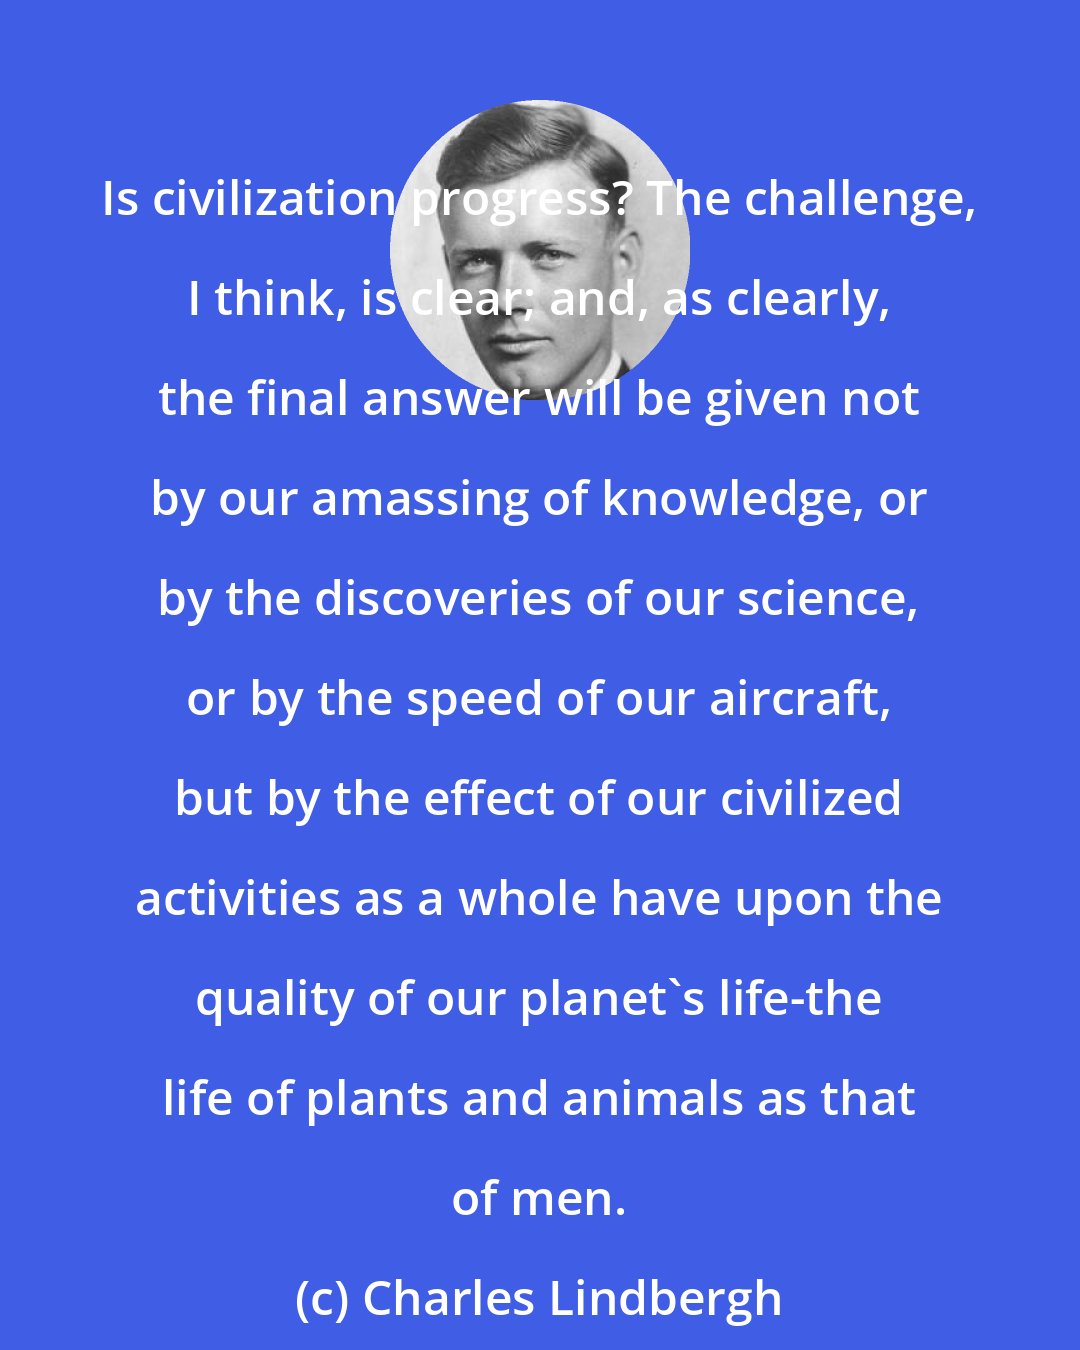 Charles Lindbergh: Is civilization progress? The challenge, I think, is clear; and, as clearly, the final answer will be given not by our amassing of knowledge, or by the discoveries of our science, or by the speed of our aircraft, but by the effect of our civilized activities as a whole have upon the quality of our planet's life-the life of plants and animals as that of men.